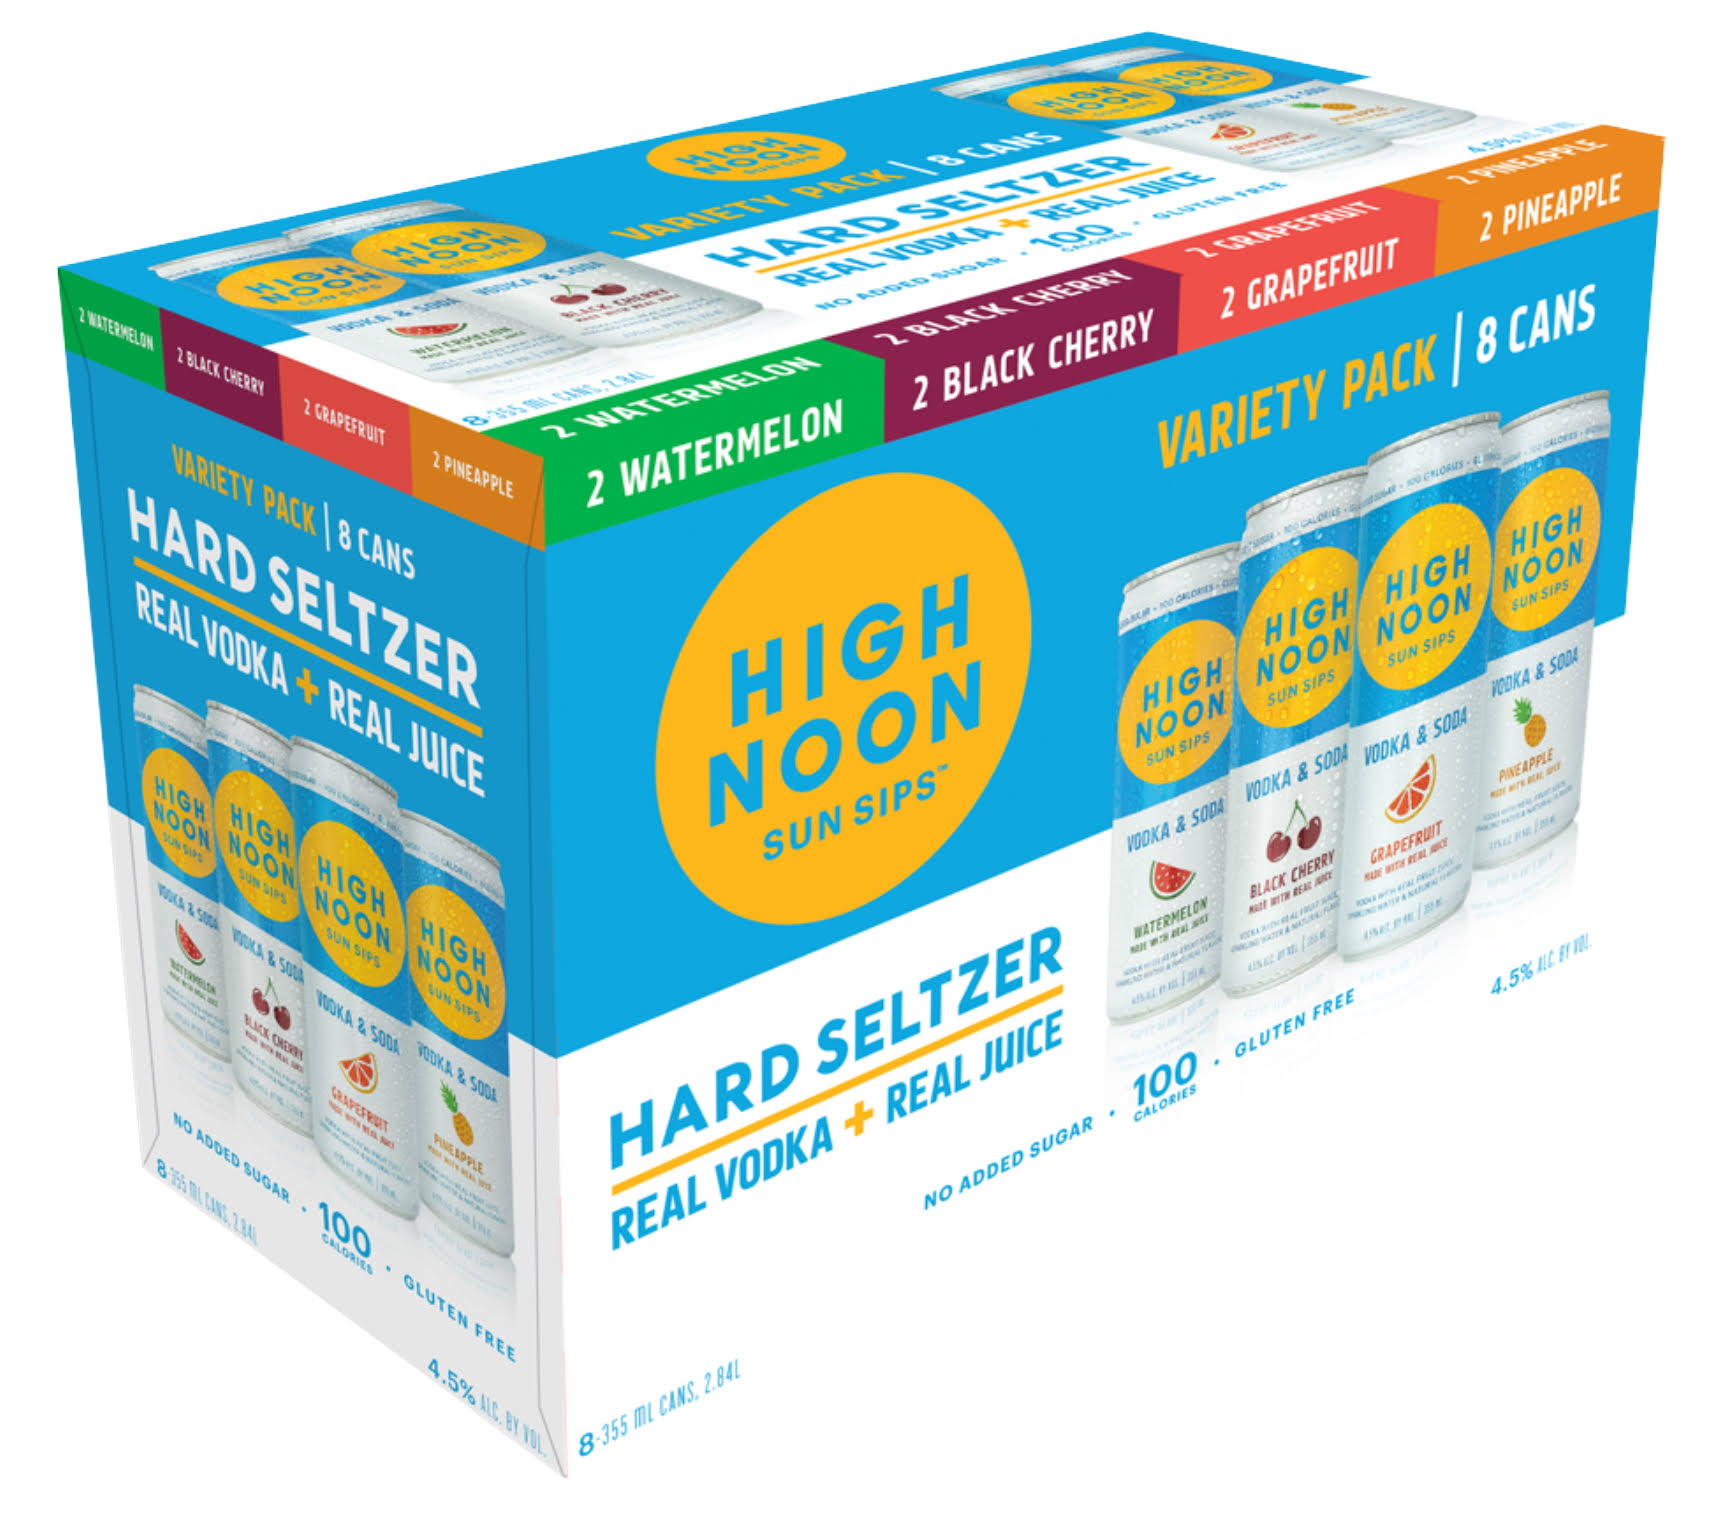 High Noon Sun Sips Hard Seltzer, Variety Pack - 8 pack, 355 ml cans